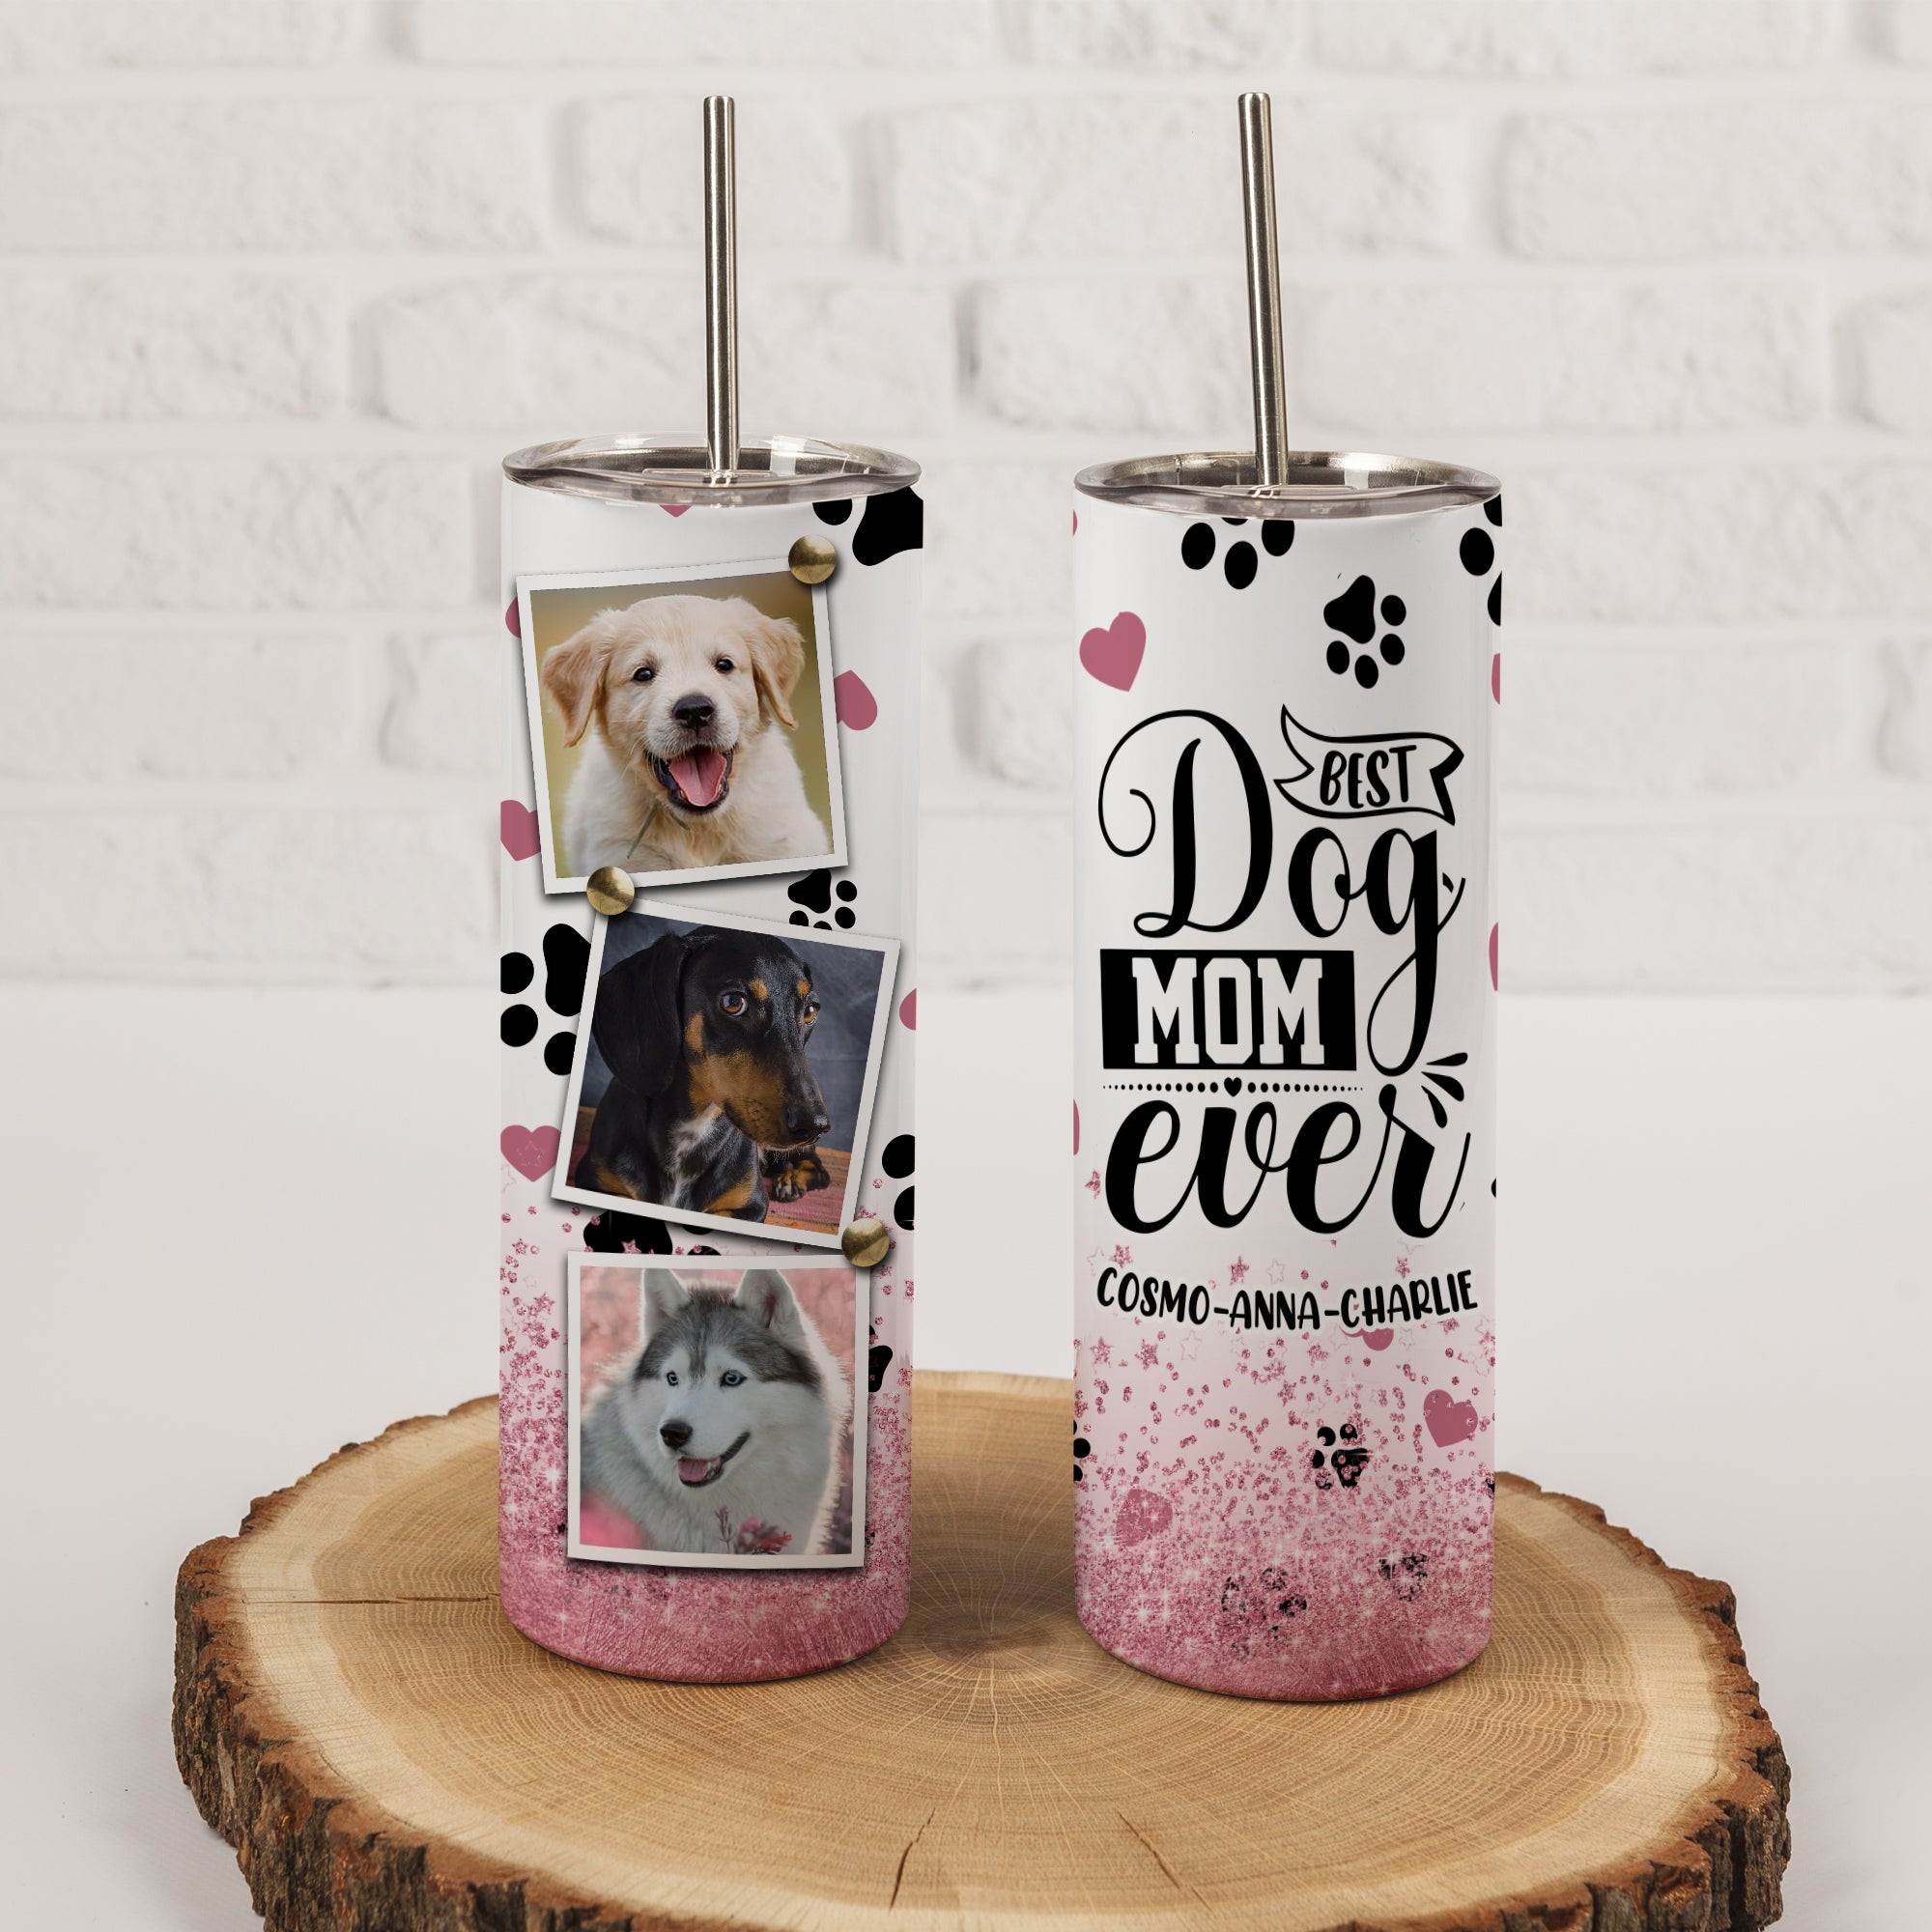 Dog Mom With Dog Photo Tumbler, Best Gift for Dog Lovers